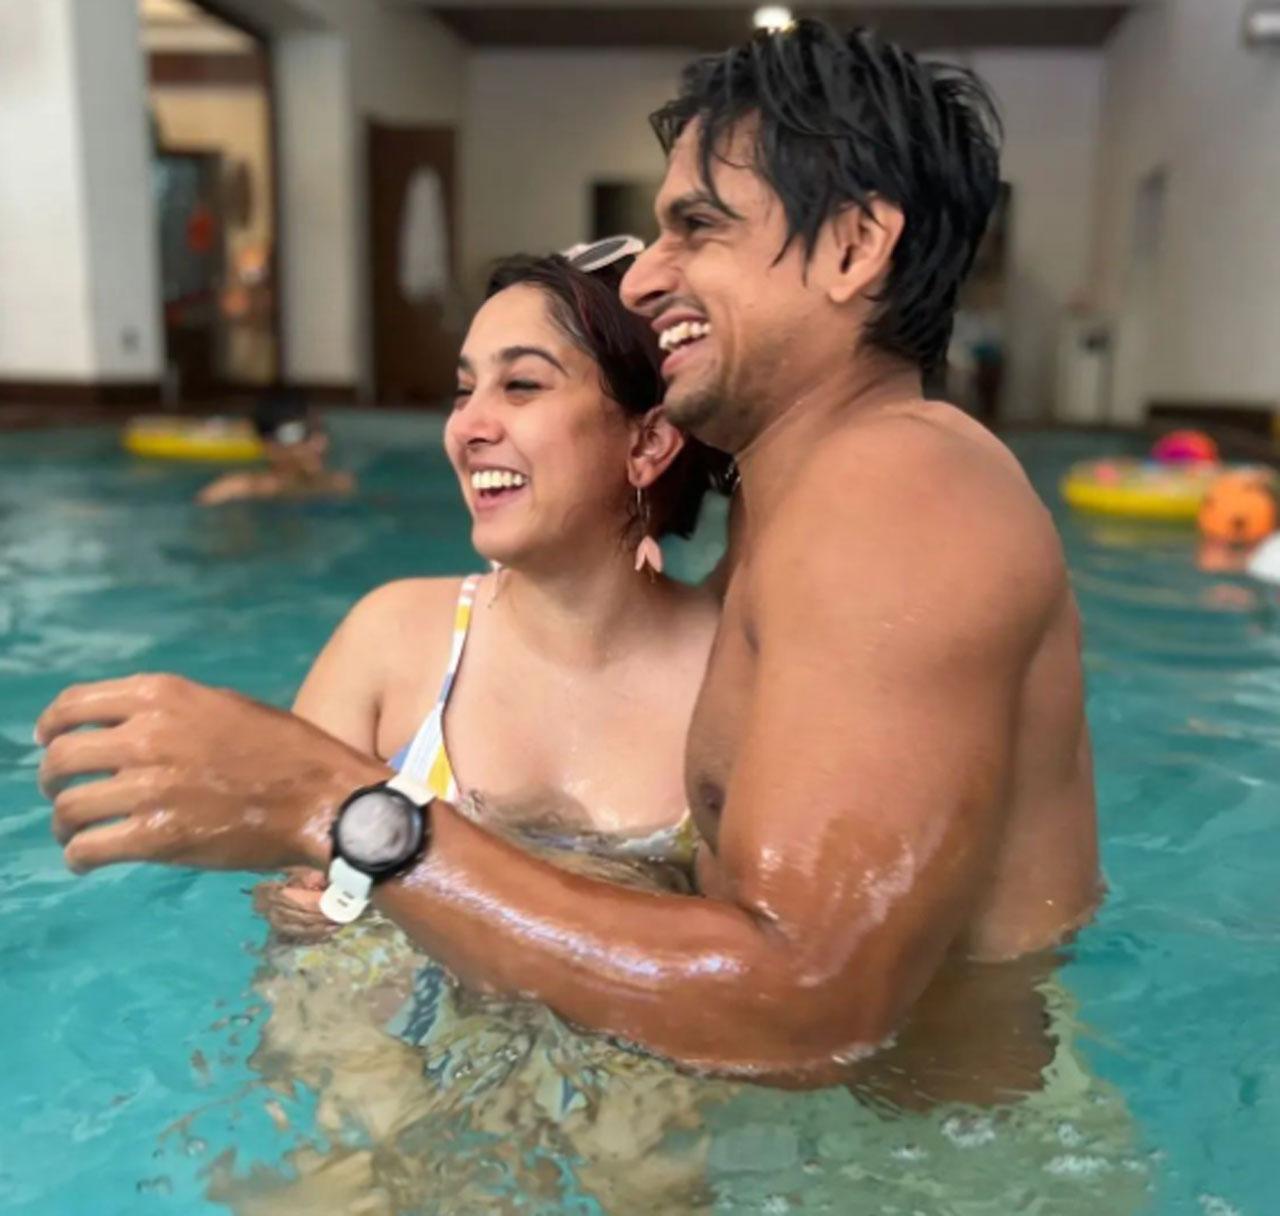 Ira Khan loves to share her daily shenanigans with her fans on her Instagram account. The Christmas wish and the subsequent celebration pictures were no exception. She shared some adorable pictures with her father Aamir Khan and boyfriend Nupur Shikhare and warned the fans in the caption that there were bloopers in the story.